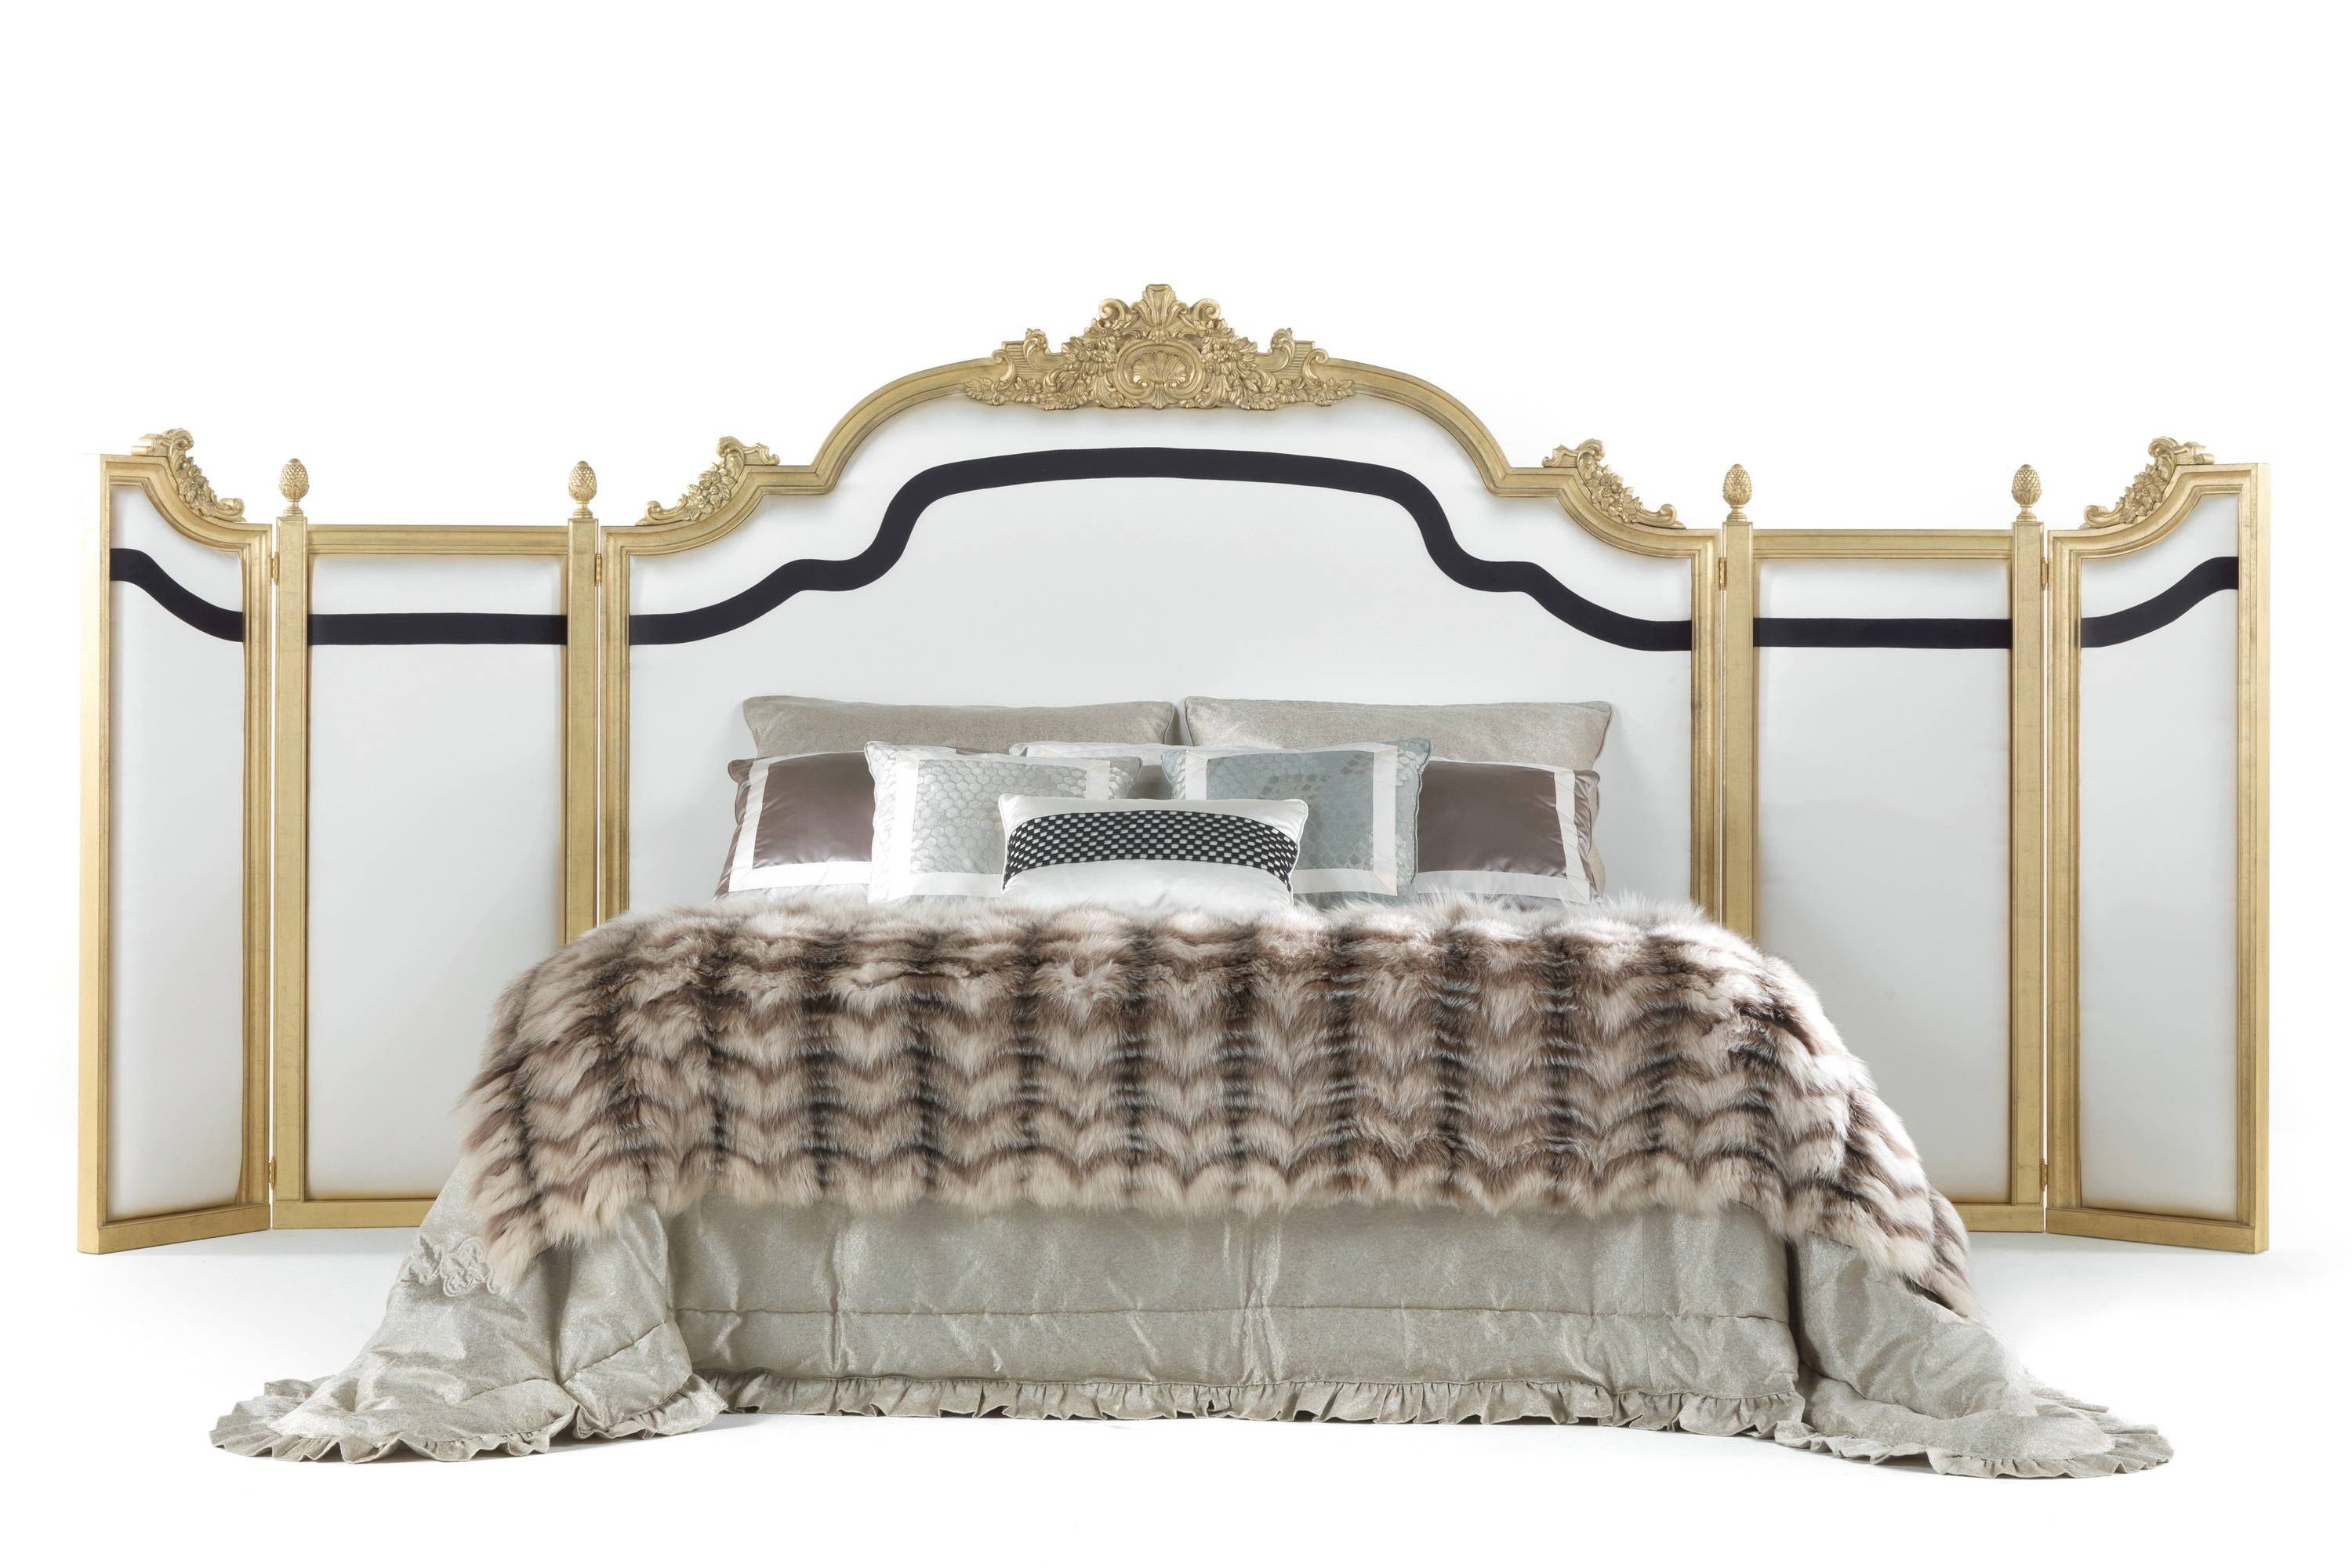 ORPHEUS bed – Jumbo Collection Italian luxury classic BEDS. tailor-made interior design projects to meet all your furnishing needs